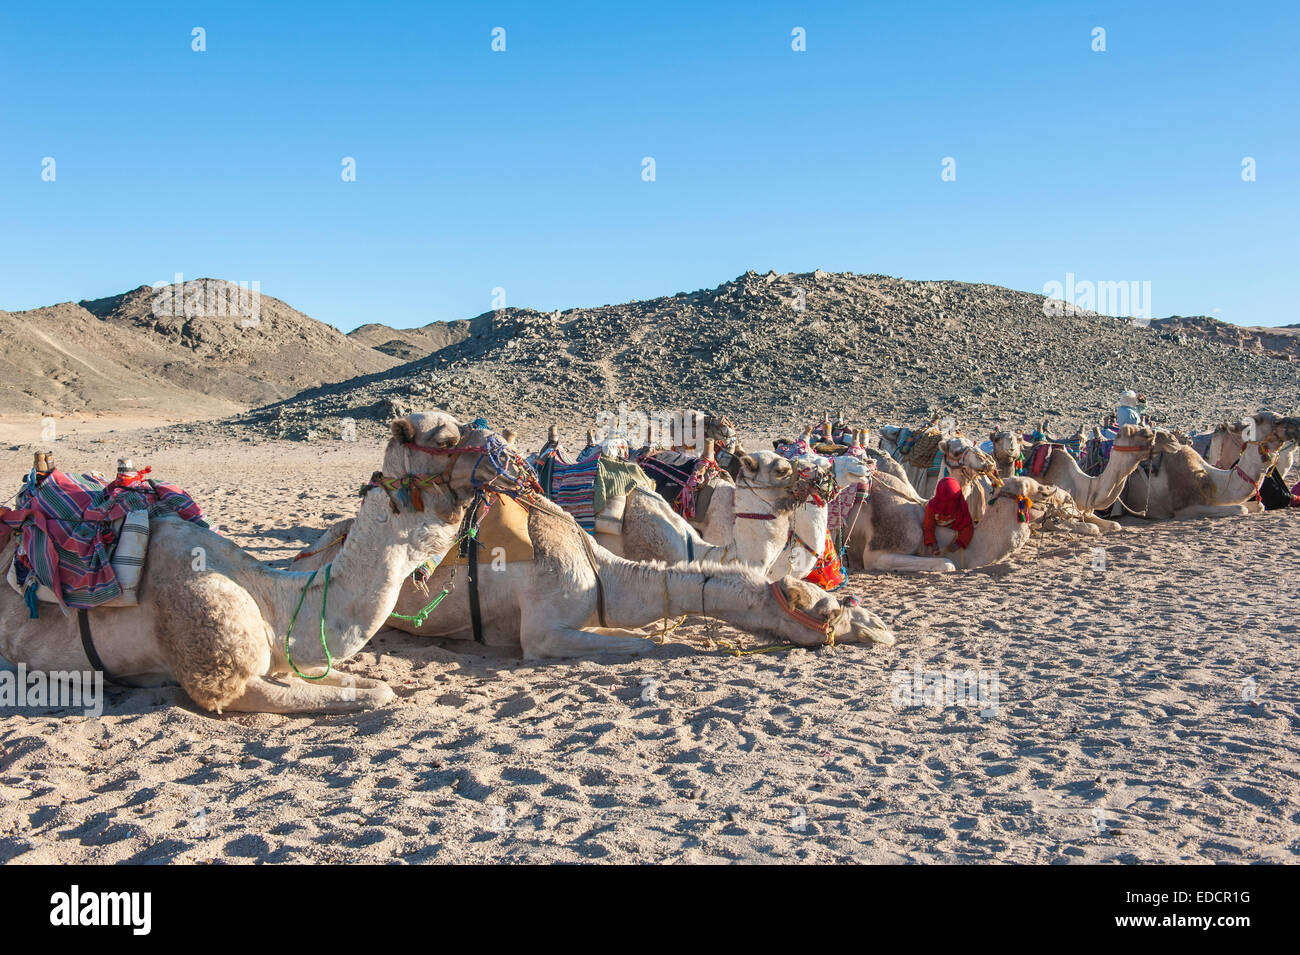 Herd of dromedary camels at egyptian bedouin village in remote mountain rocky desert Stock Photo